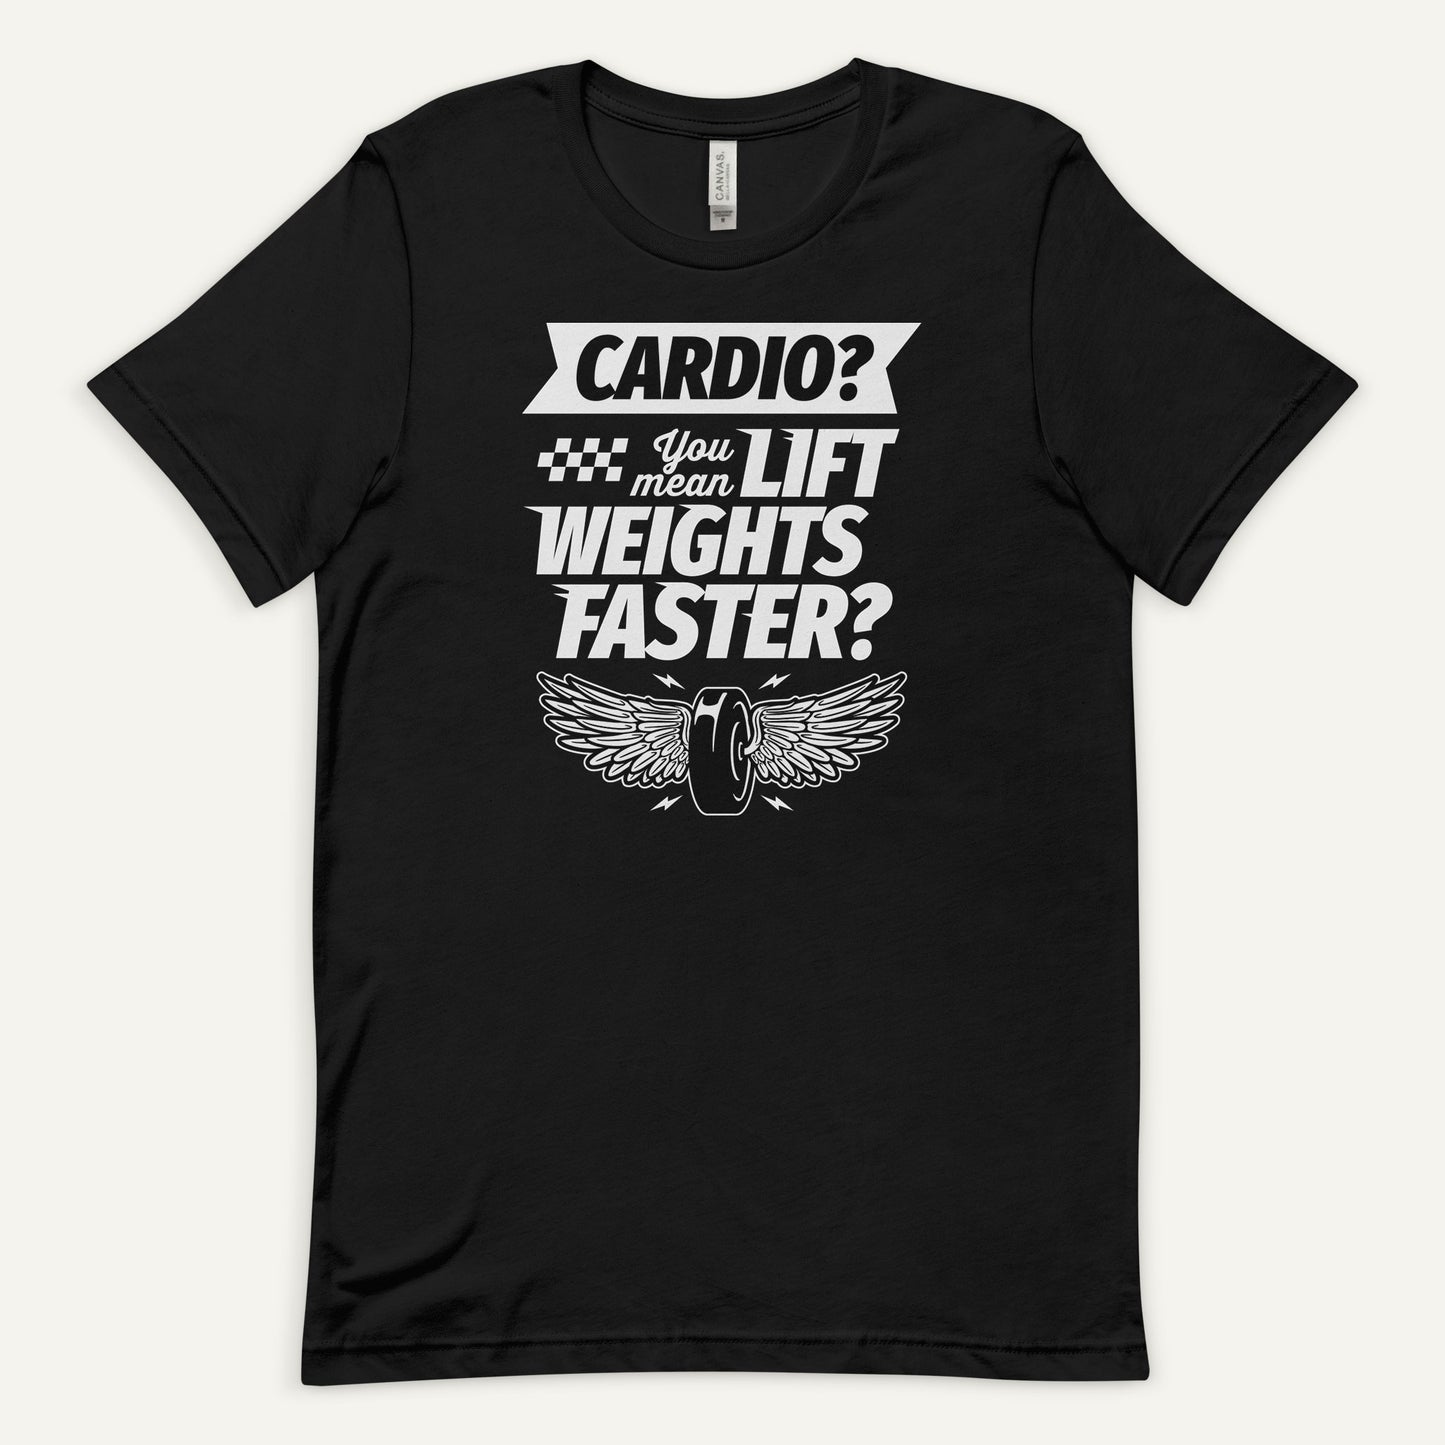 Cardio You Mean Lift Weights Faster Men’s Standard T-Shirt